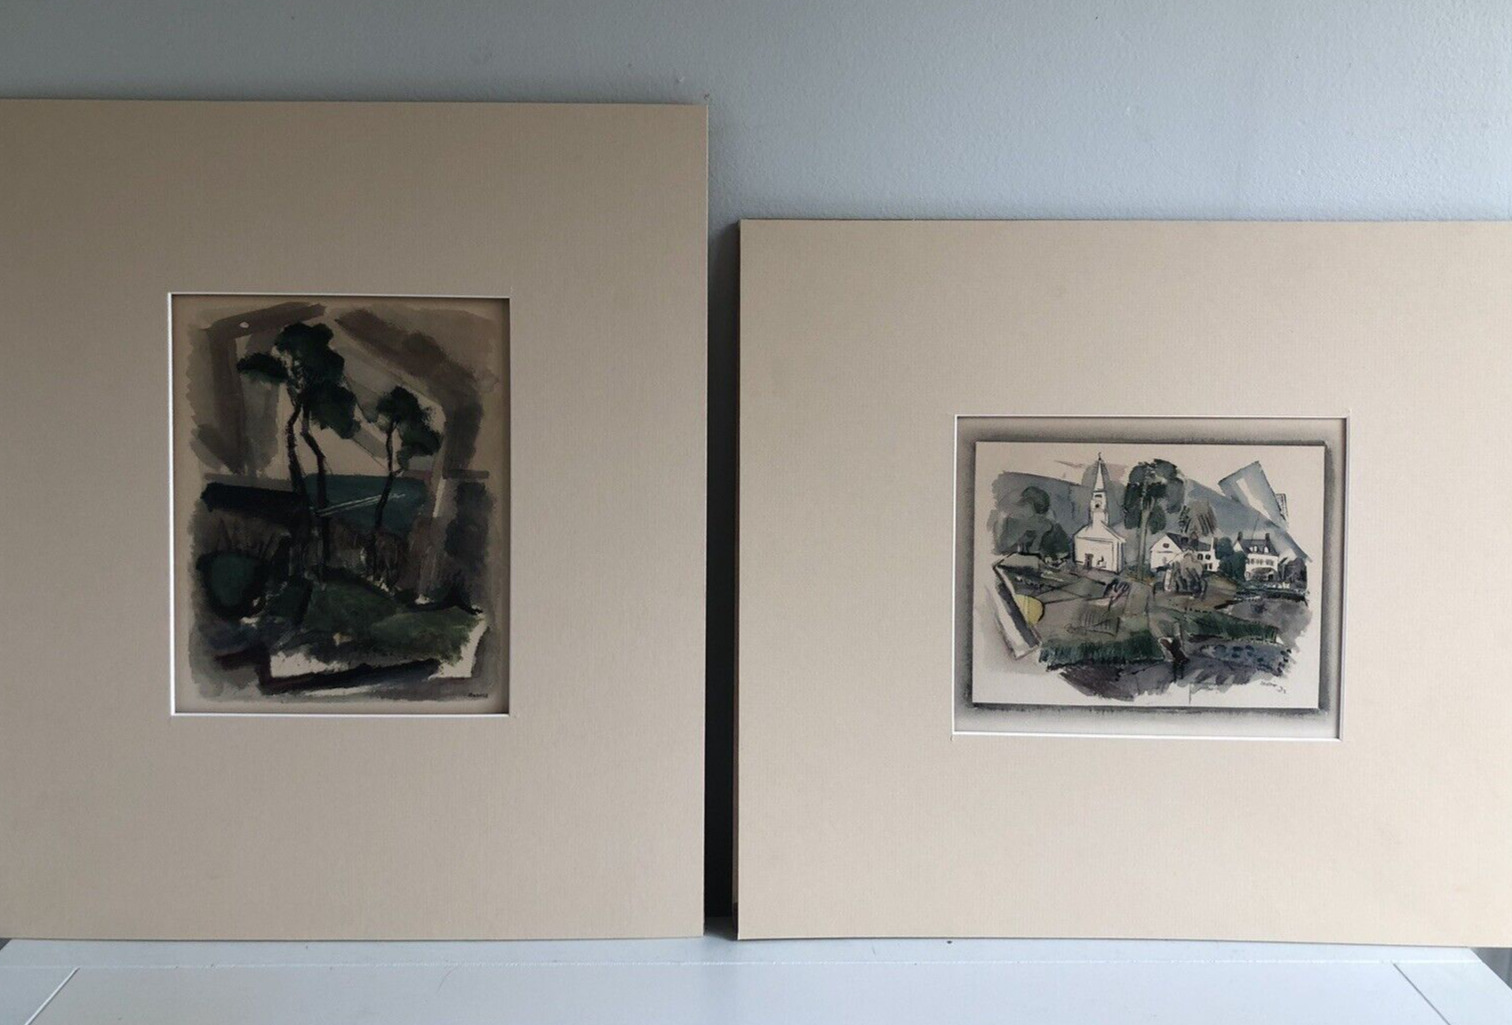 2 Antique John Marin Abstract Modernist Art Colotype Prints - Maine 1930's